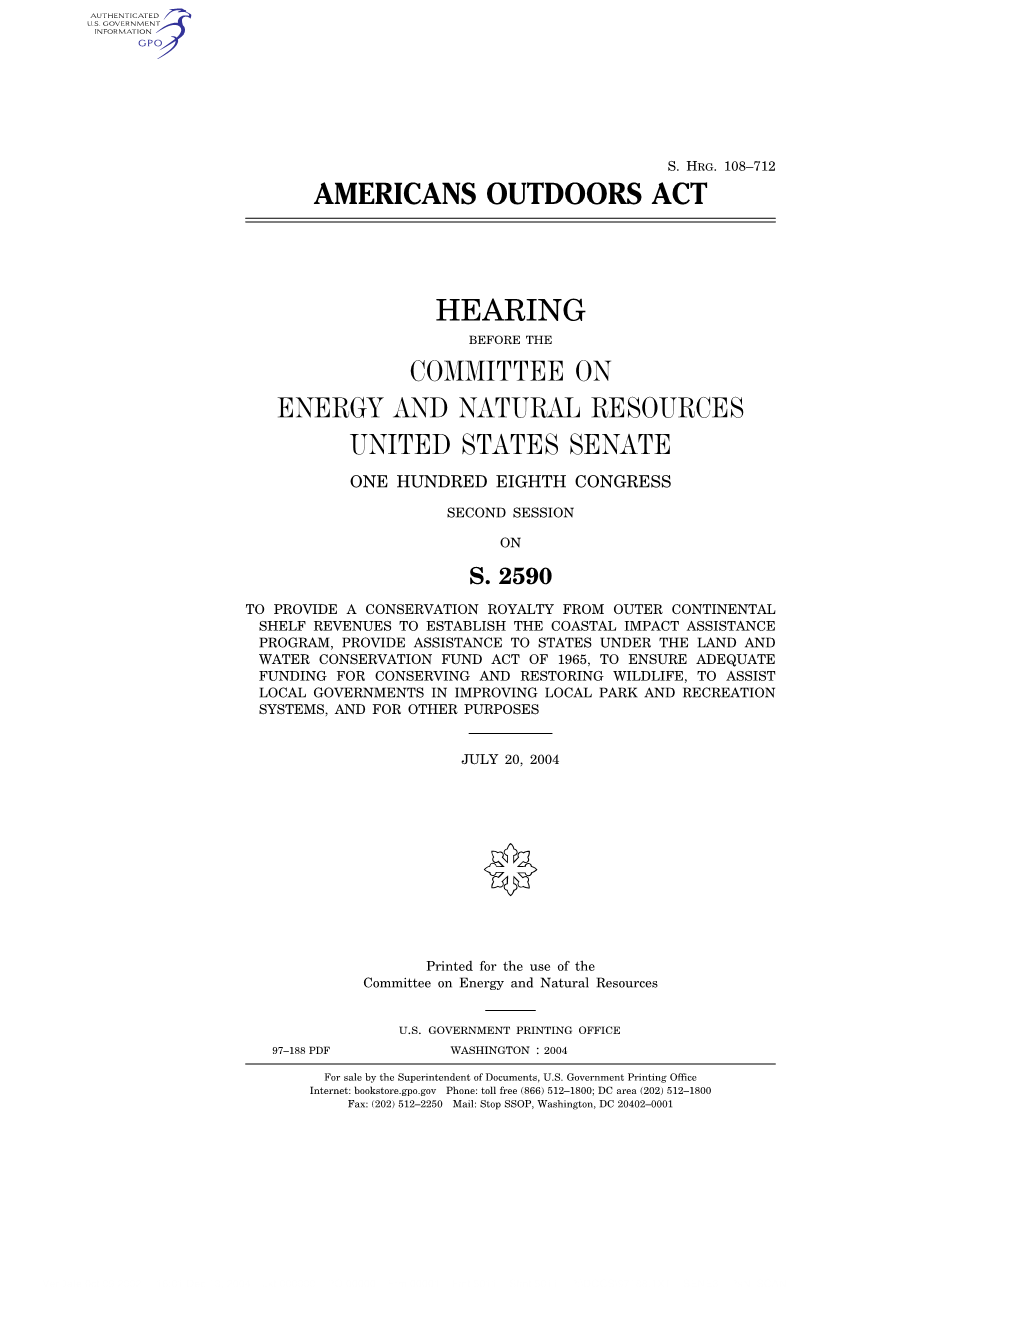 Americans Outdoors Act Hearing